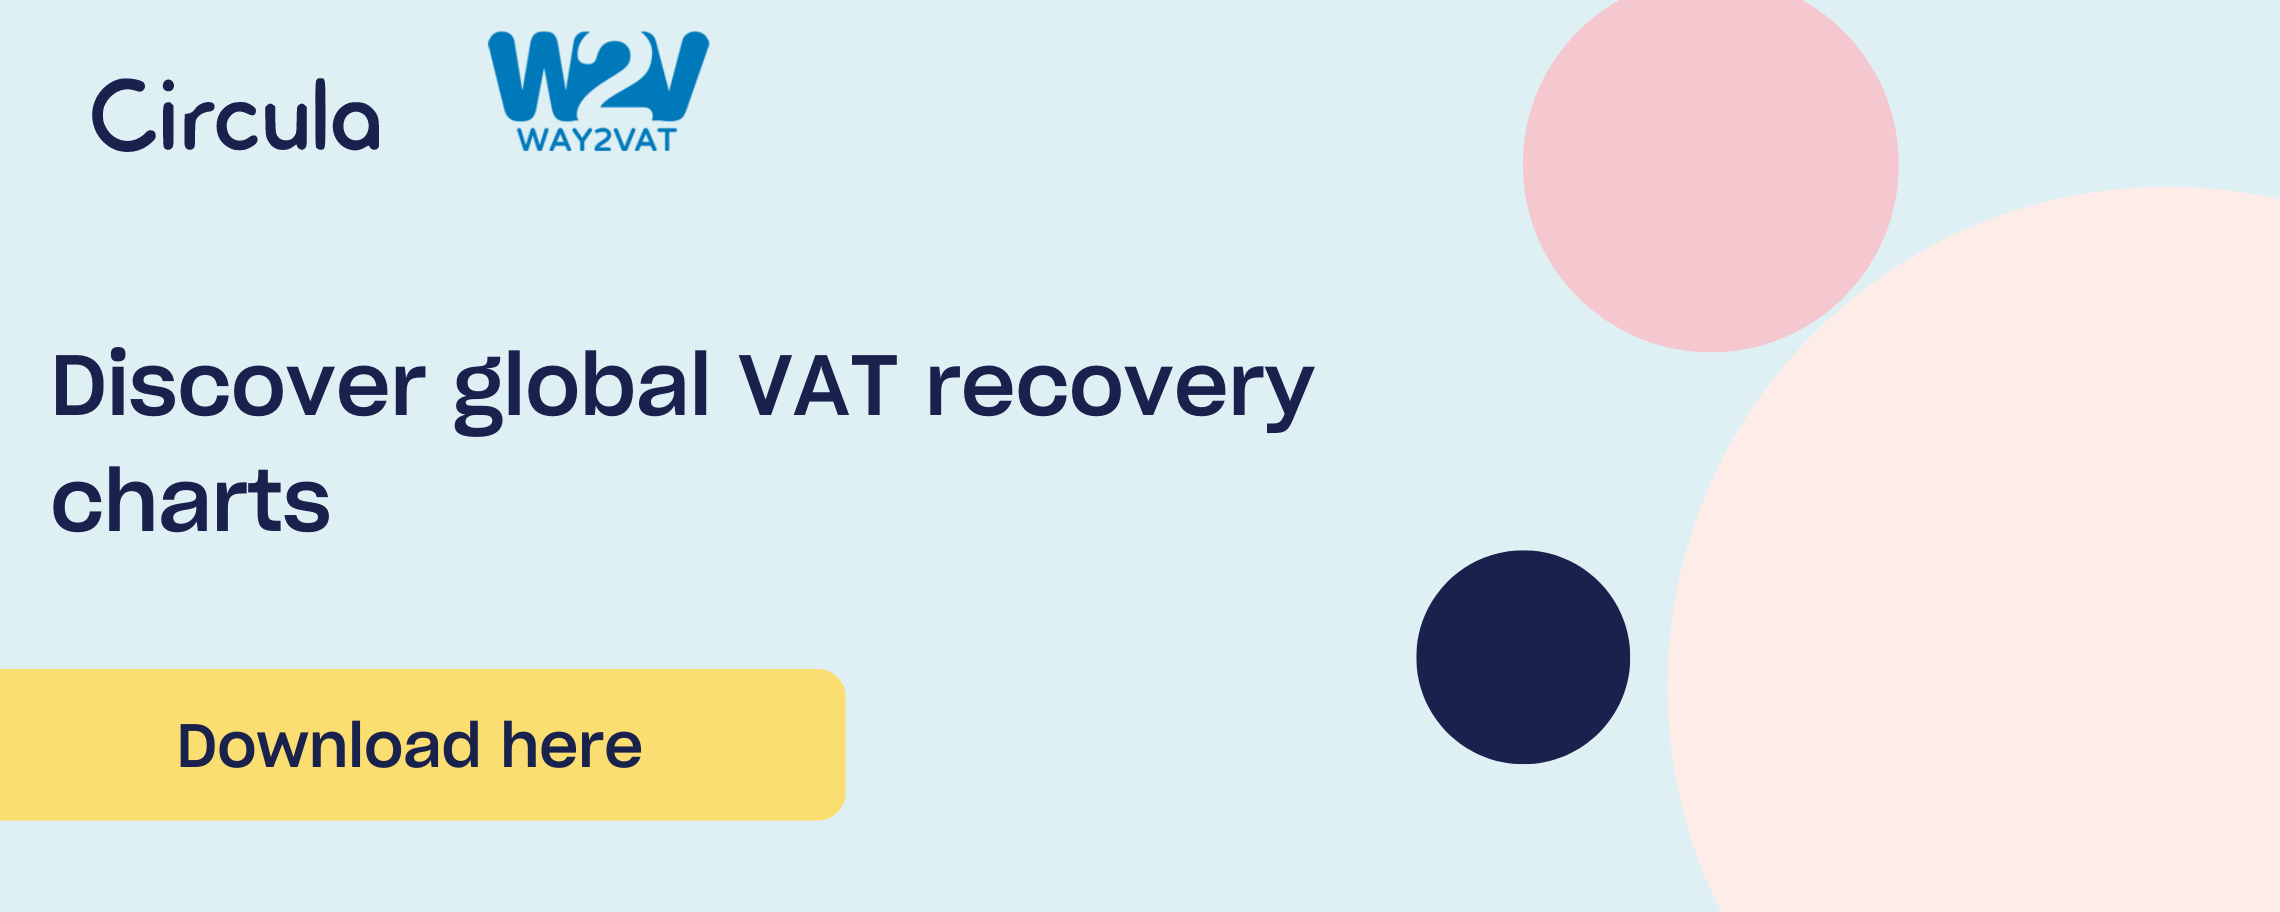 VAT recovery charts